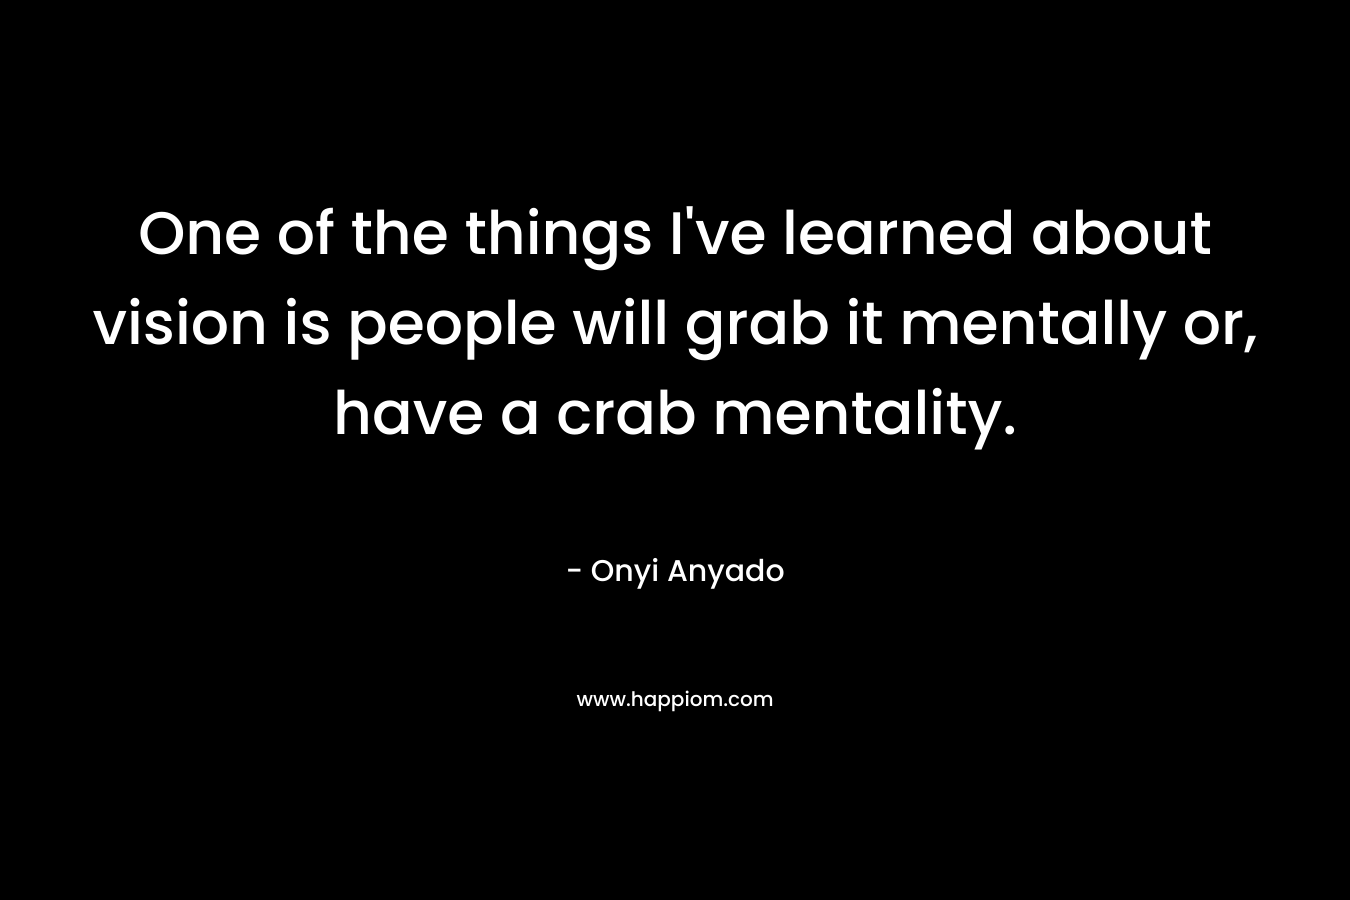 One of the things I've learned about vision is people will grab it mentally or, have a crab mentality.